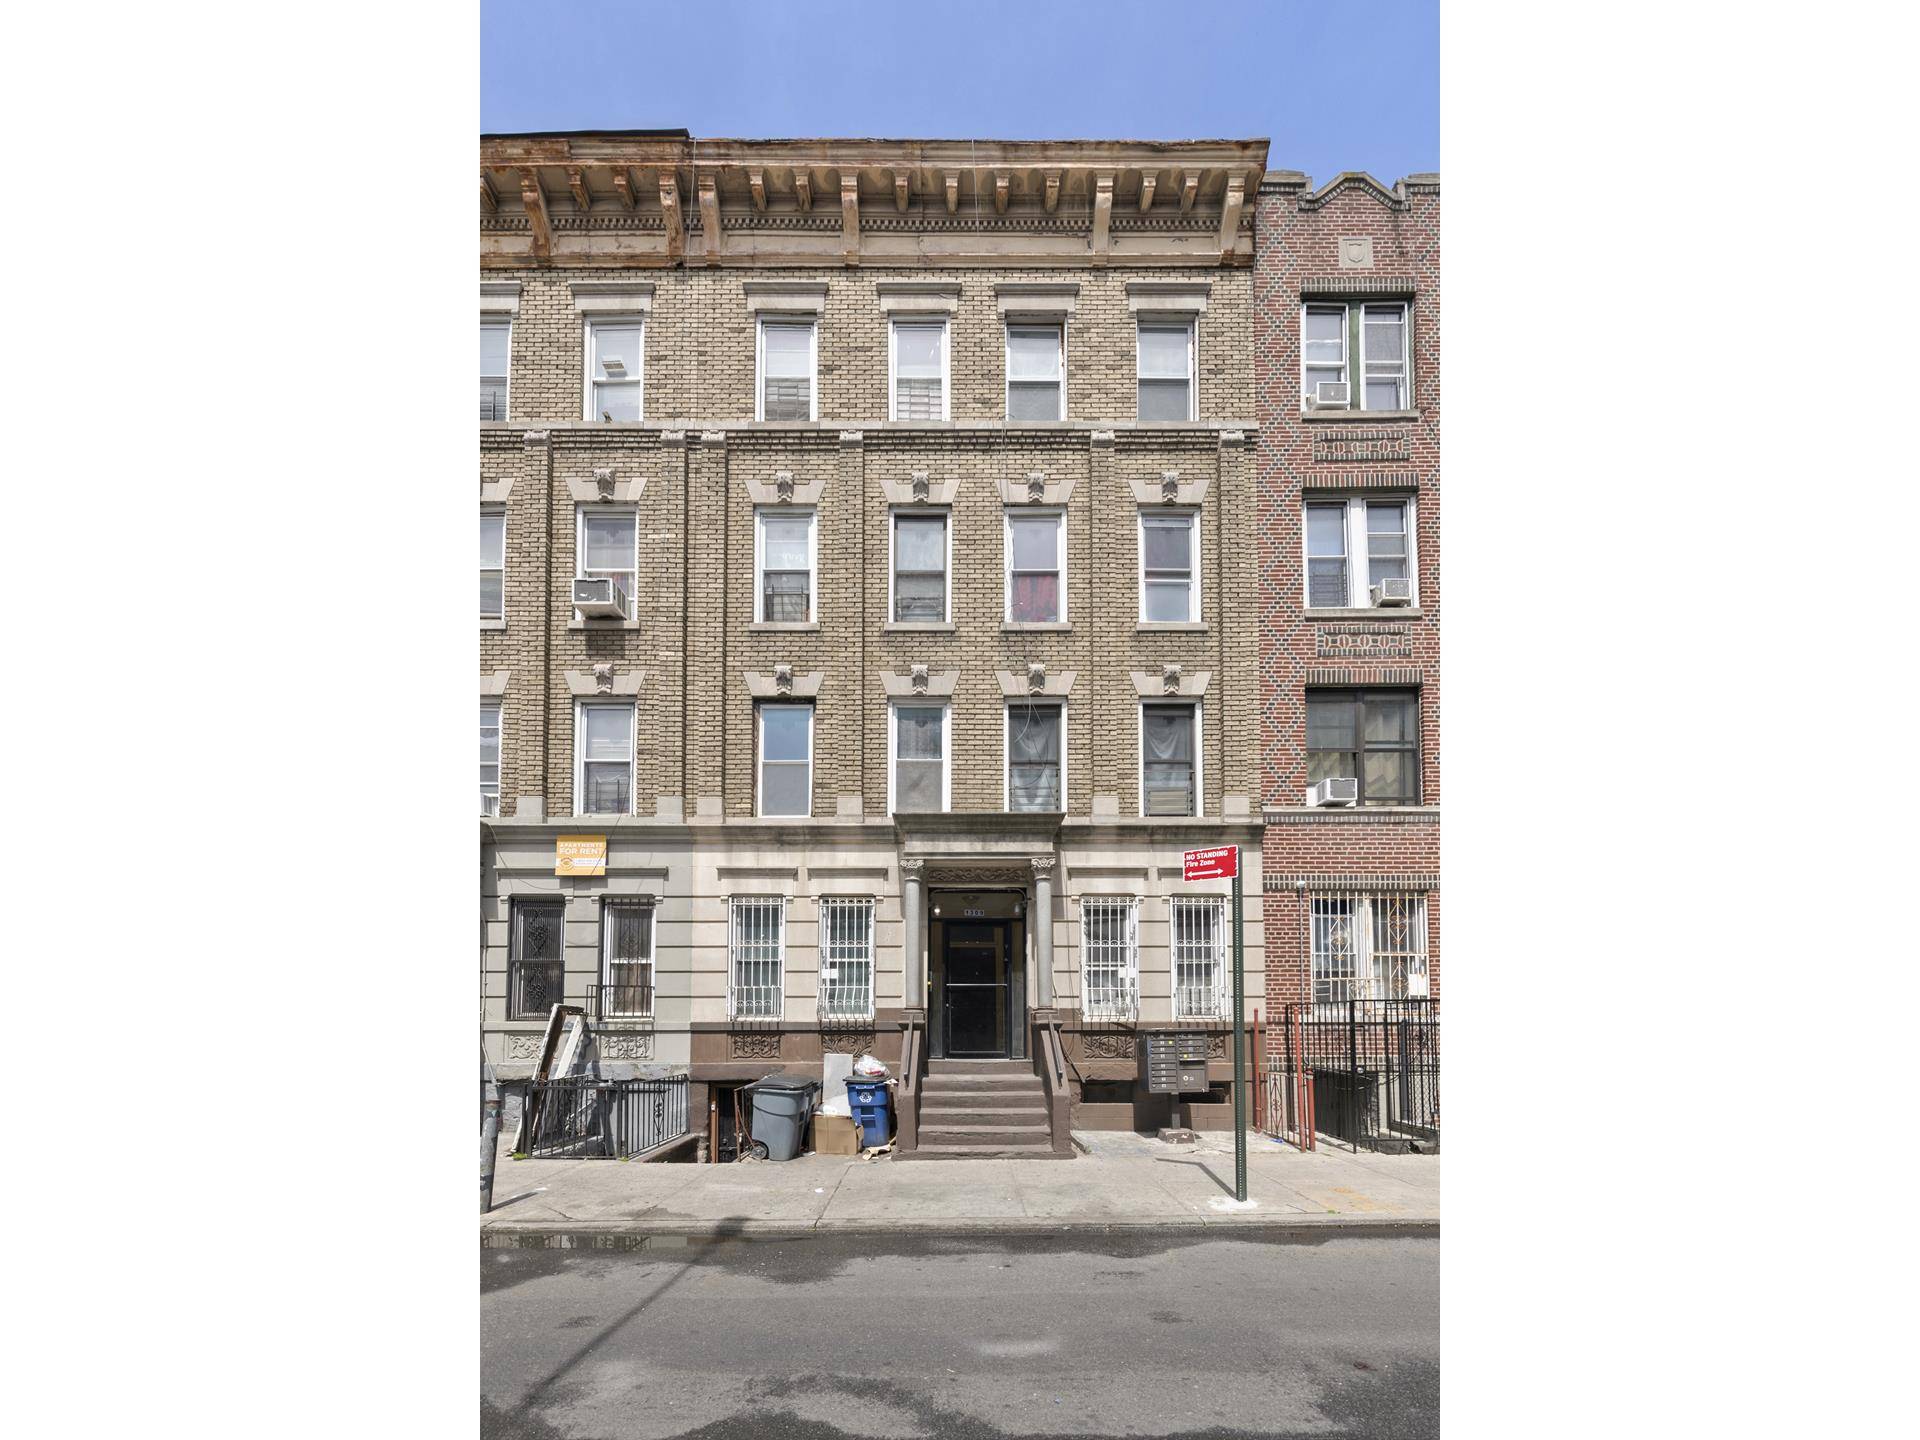 Seize the opportunity to acquire 1309 Lincoln Place, a desirably positioned 8 unit investment property in prime Crown Heights.